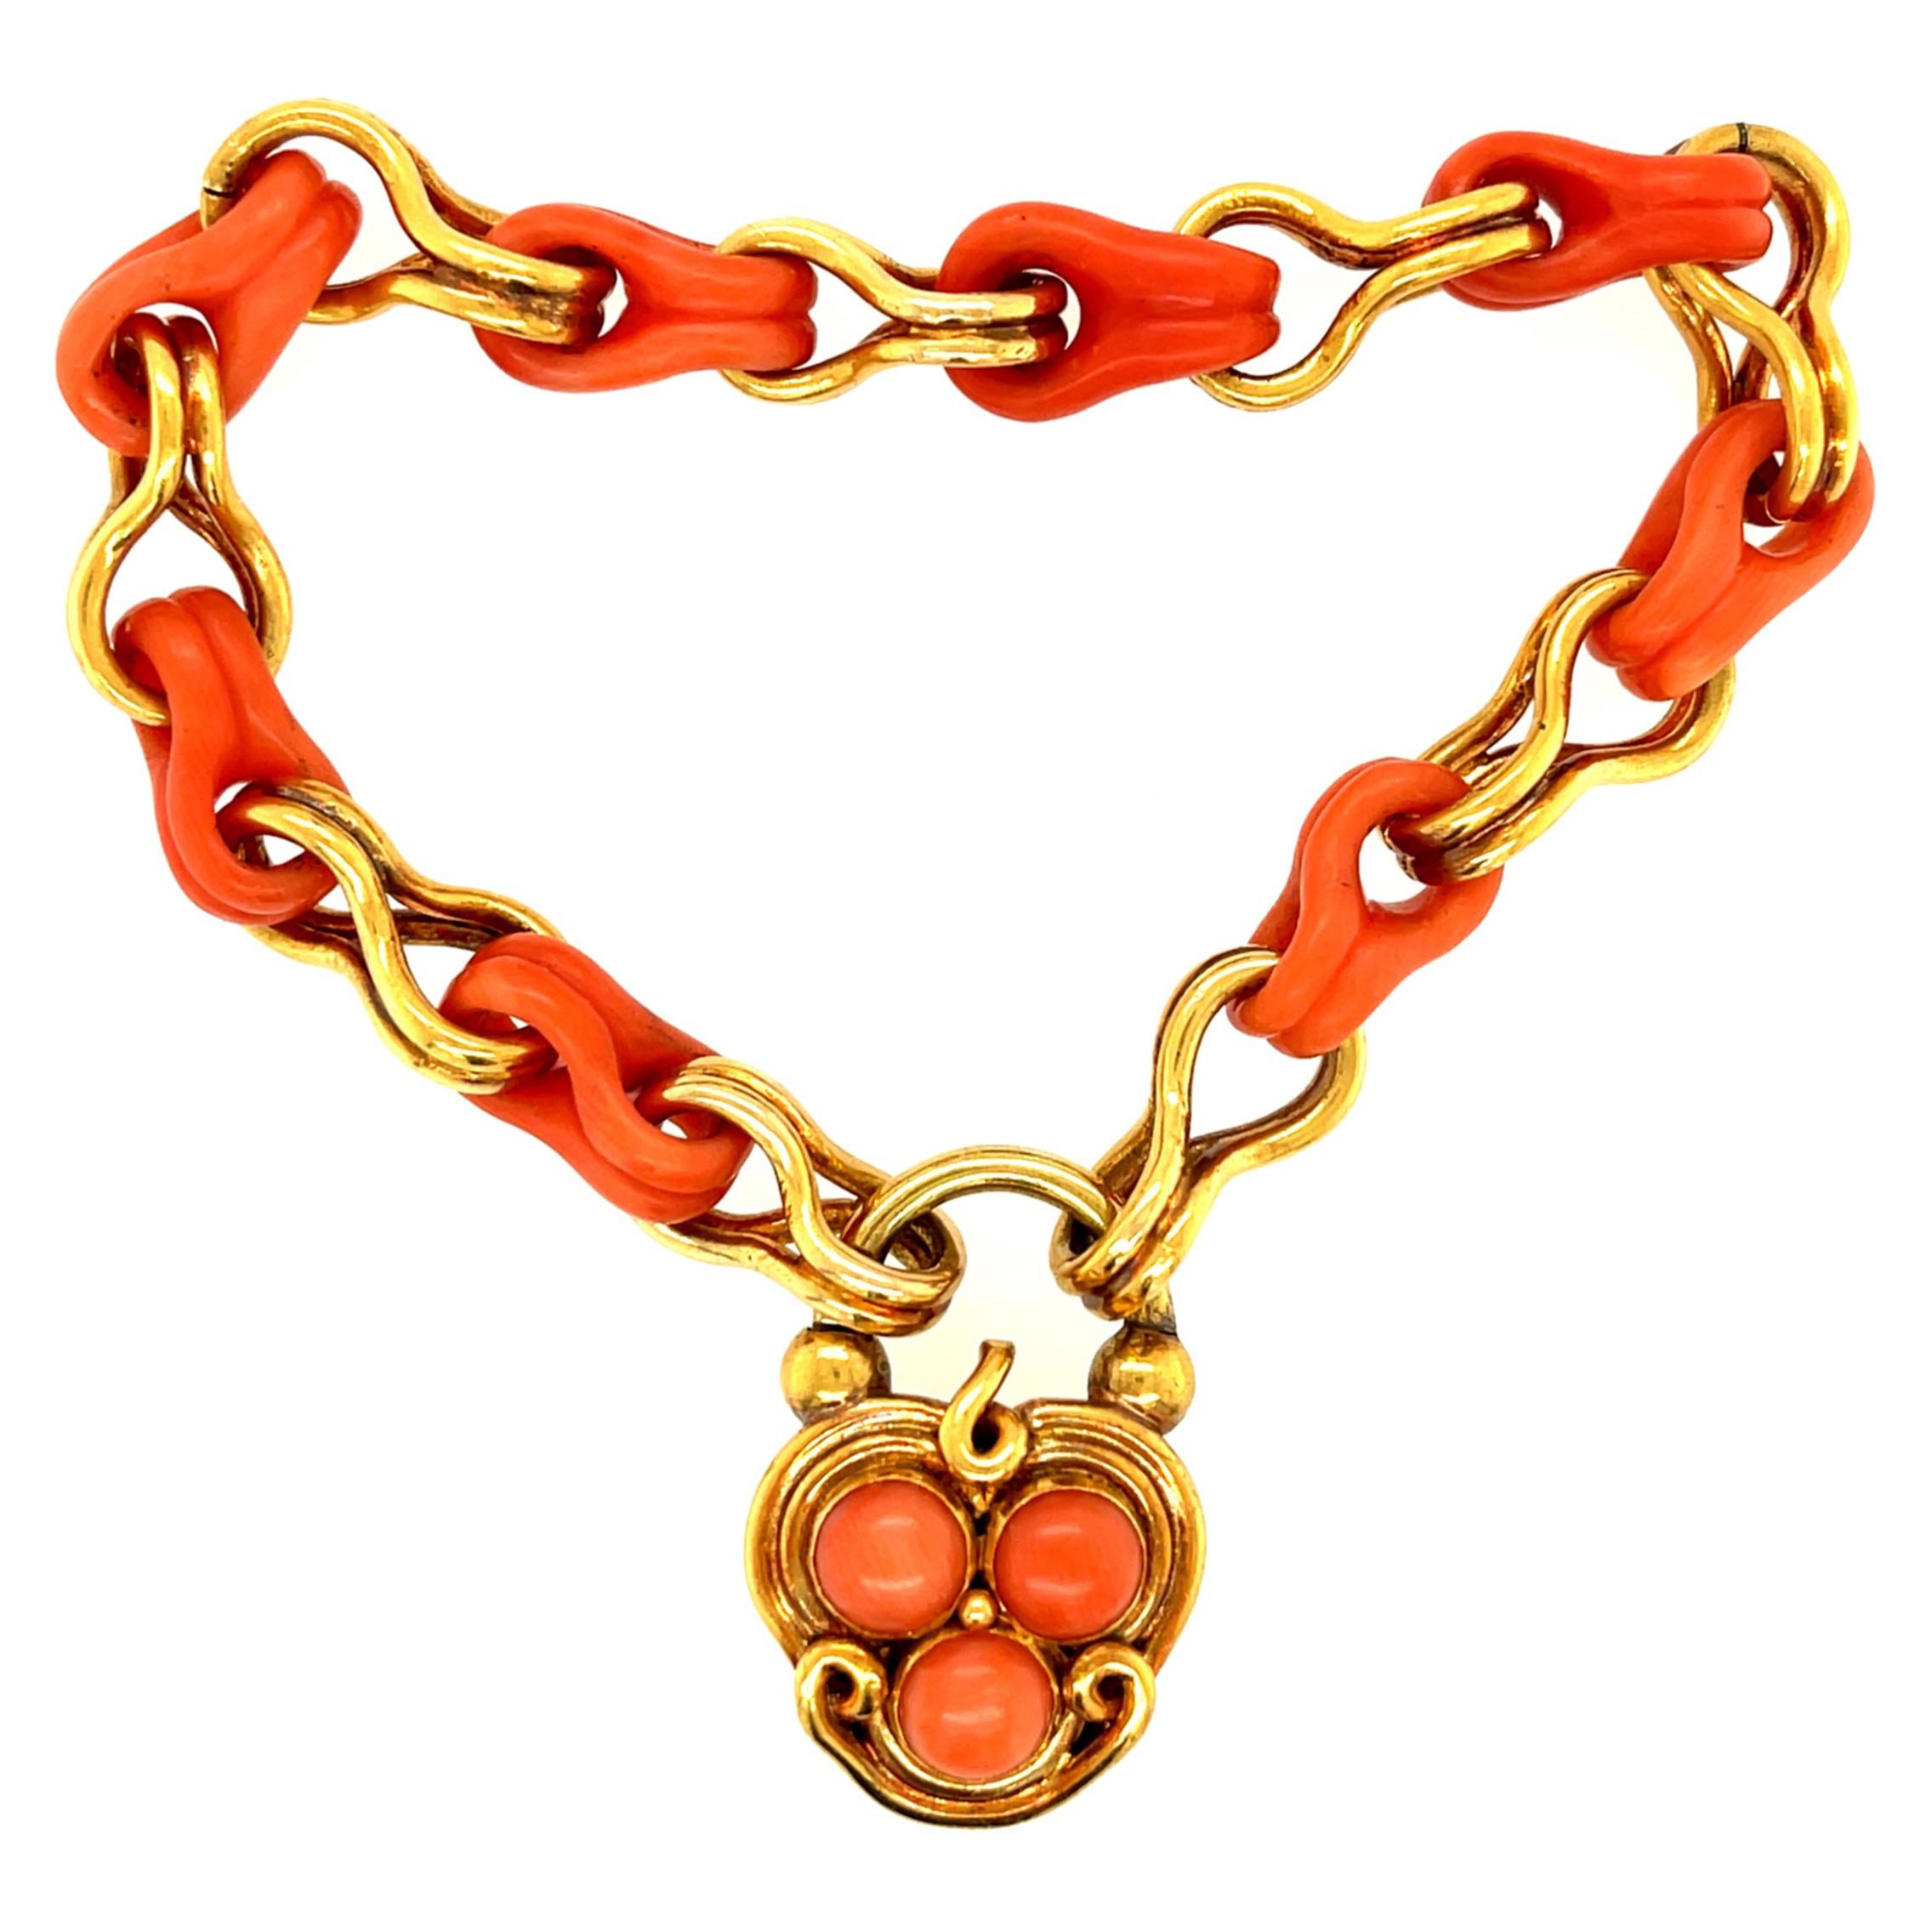 Antique Victorian Gold and Coral Link Bracelet with Padlock Clasp